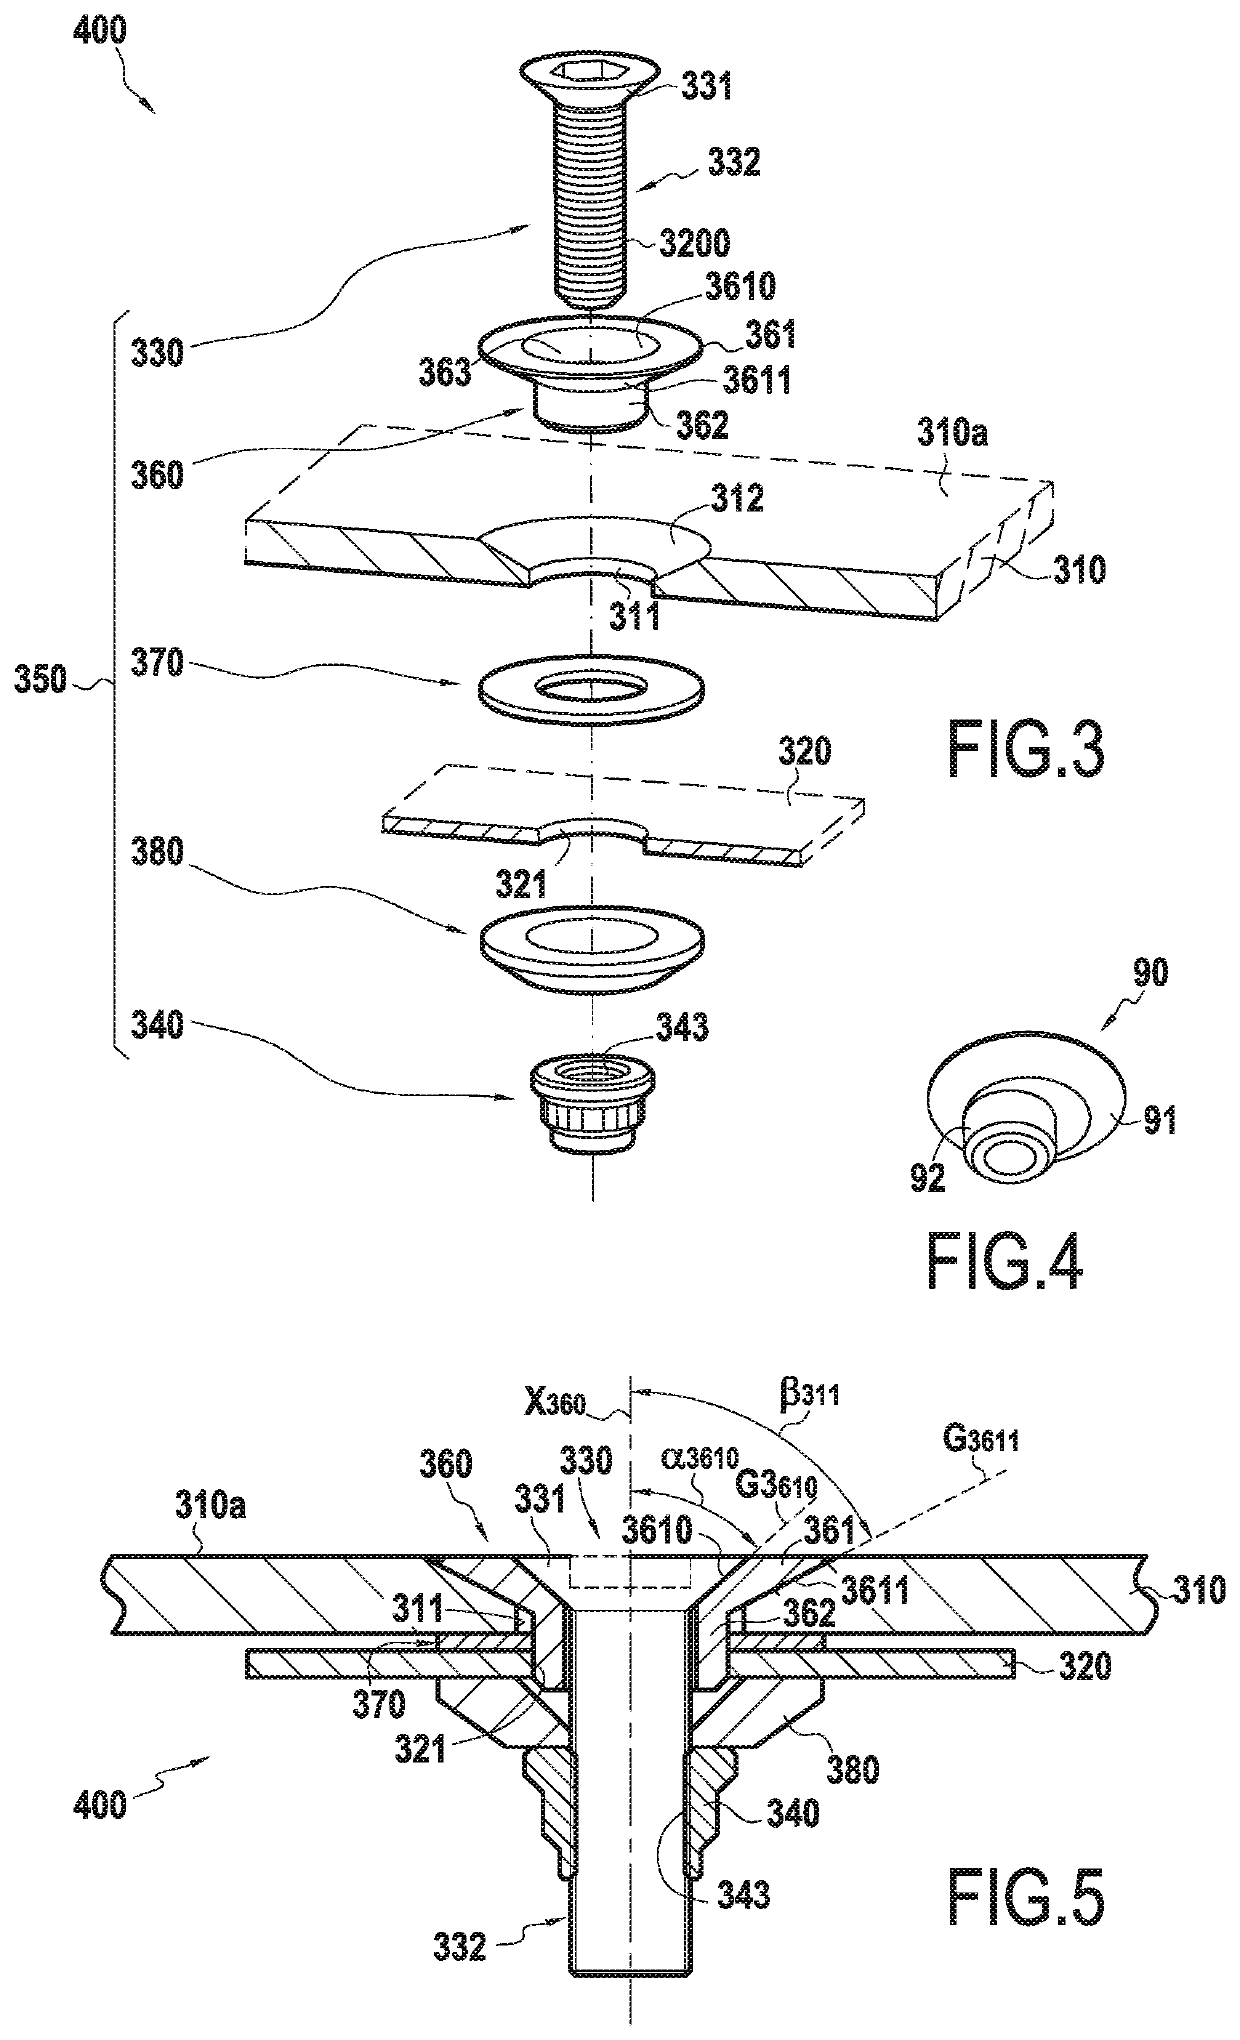 Assembly by mechanical connection including at least one part made of composite material